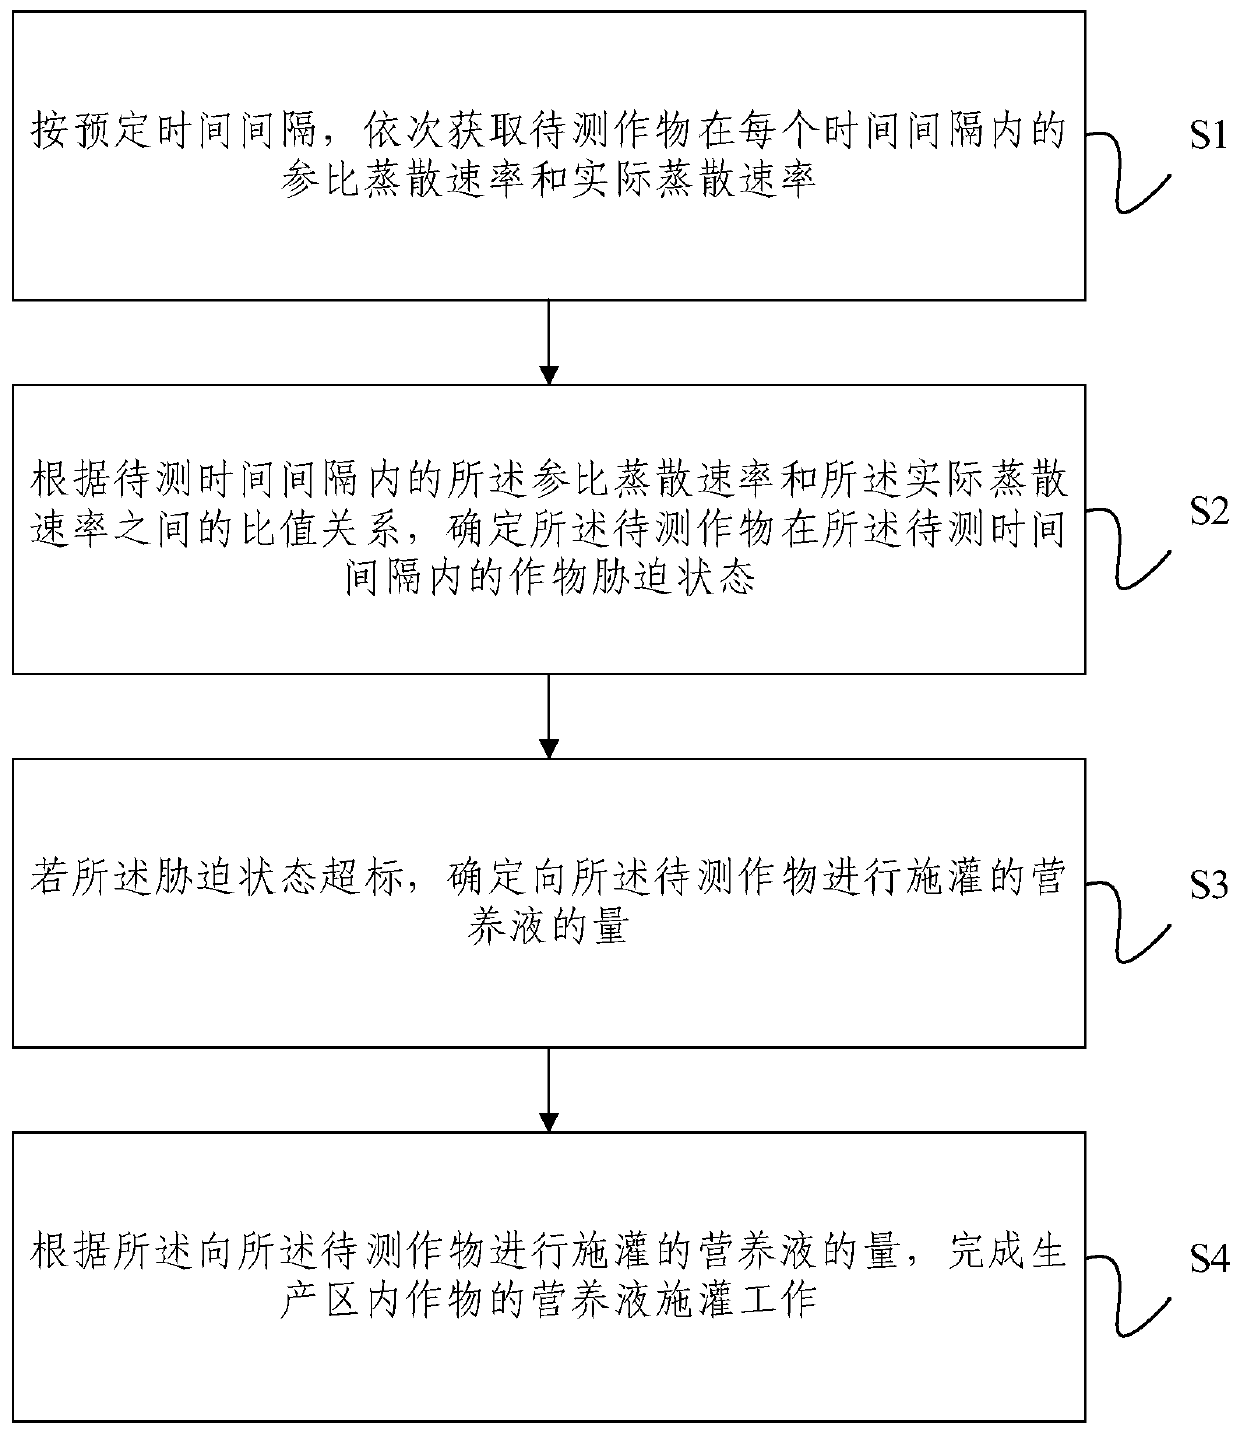 Soilless culture nutrient solution management and control method and system